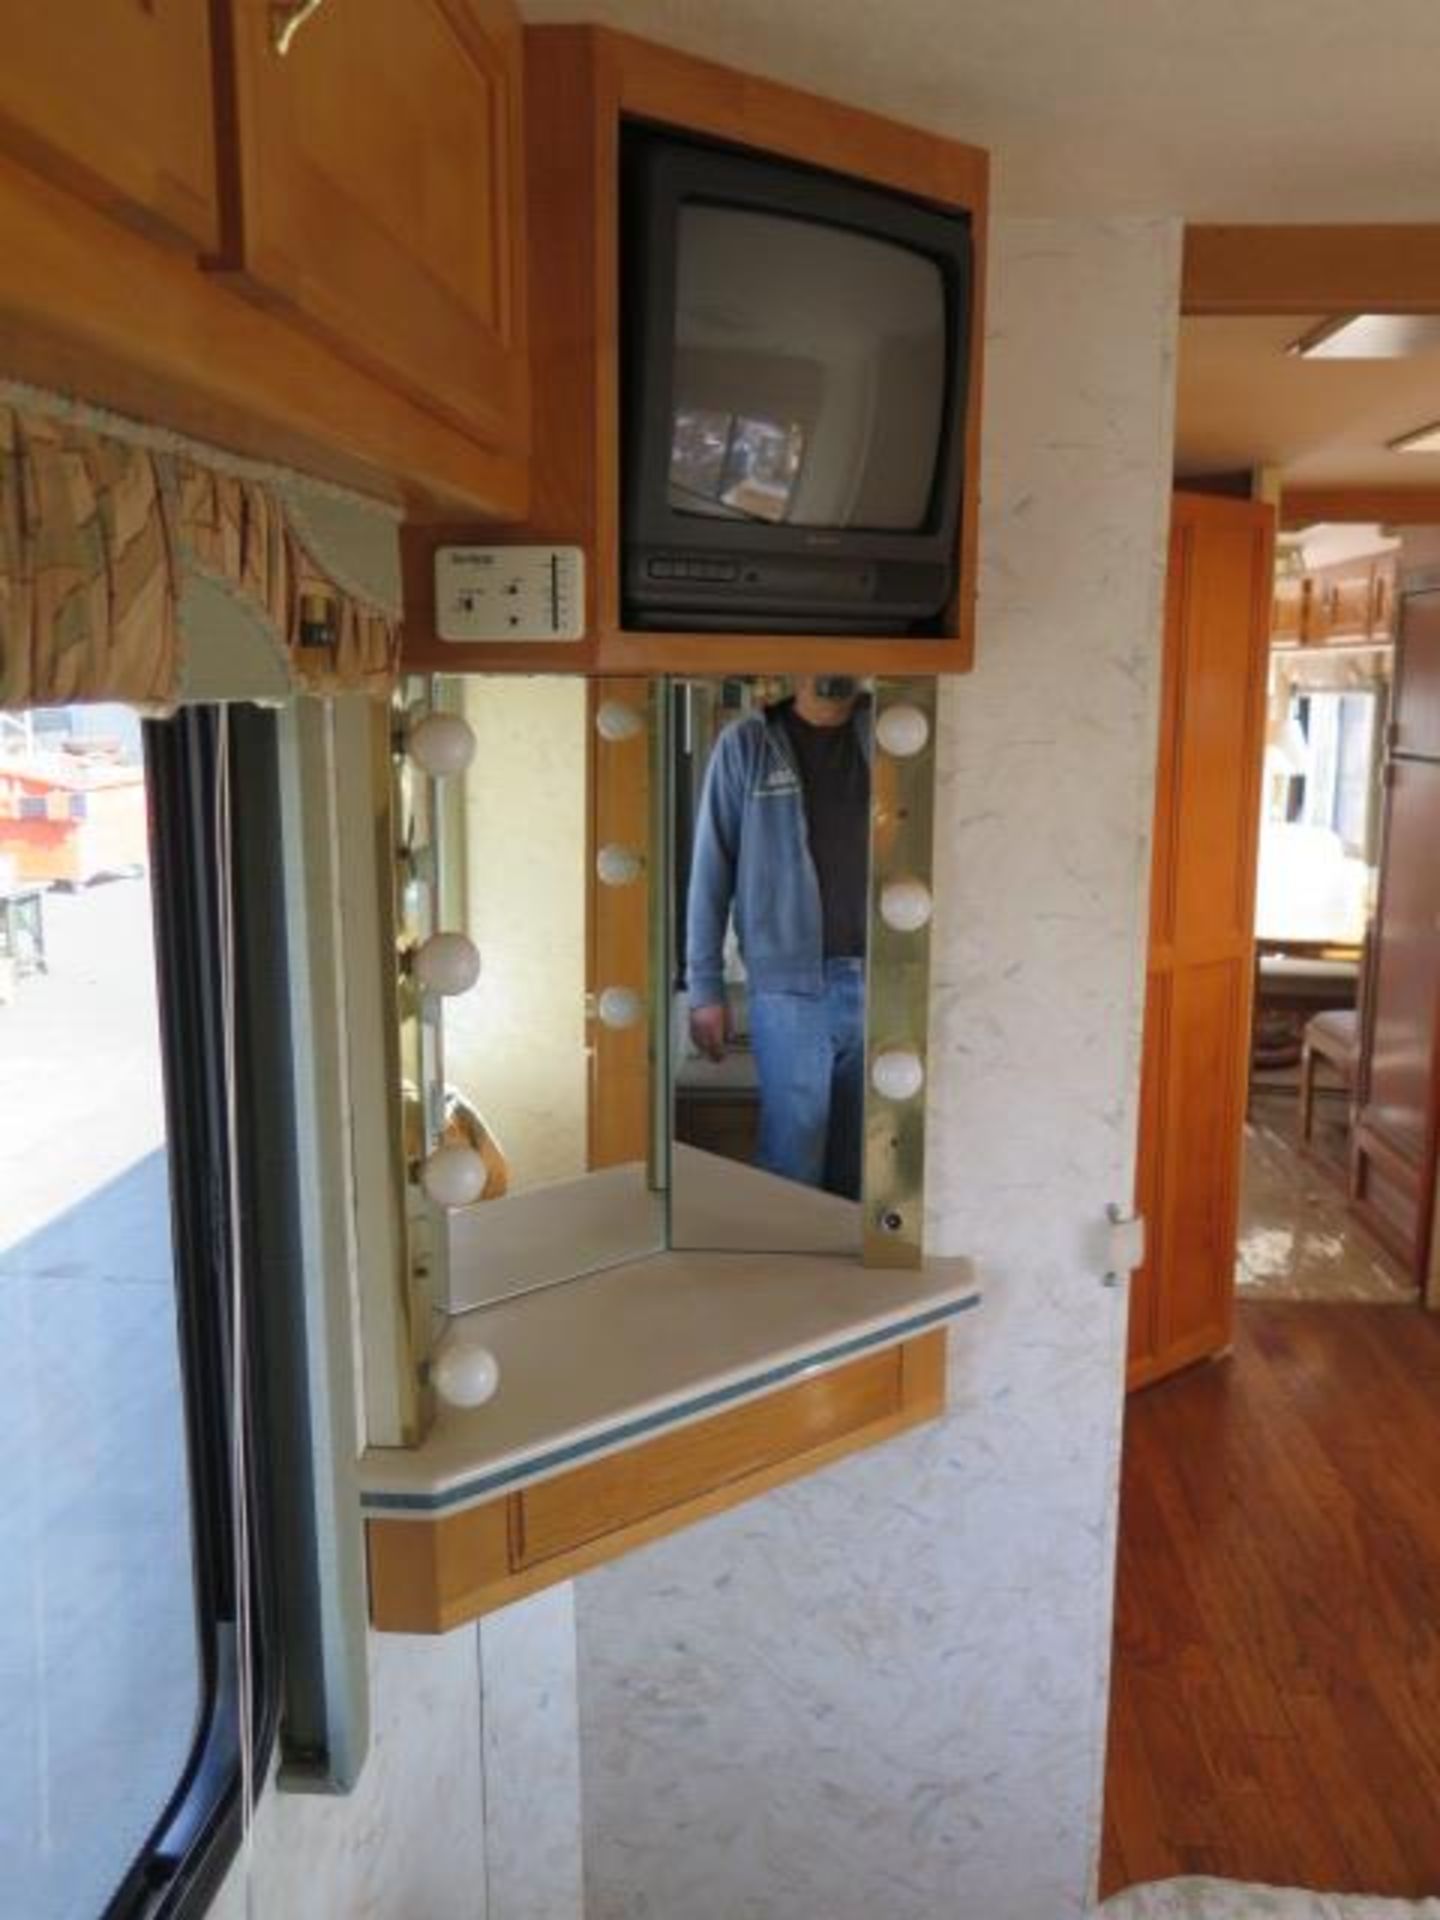 1997 Safari Motor Coacher Motor Home Lisc# 5PEJ100 w/ CAT Diesel Engine, Automatic Trans, SOLD AS IS - Image 48 of 54